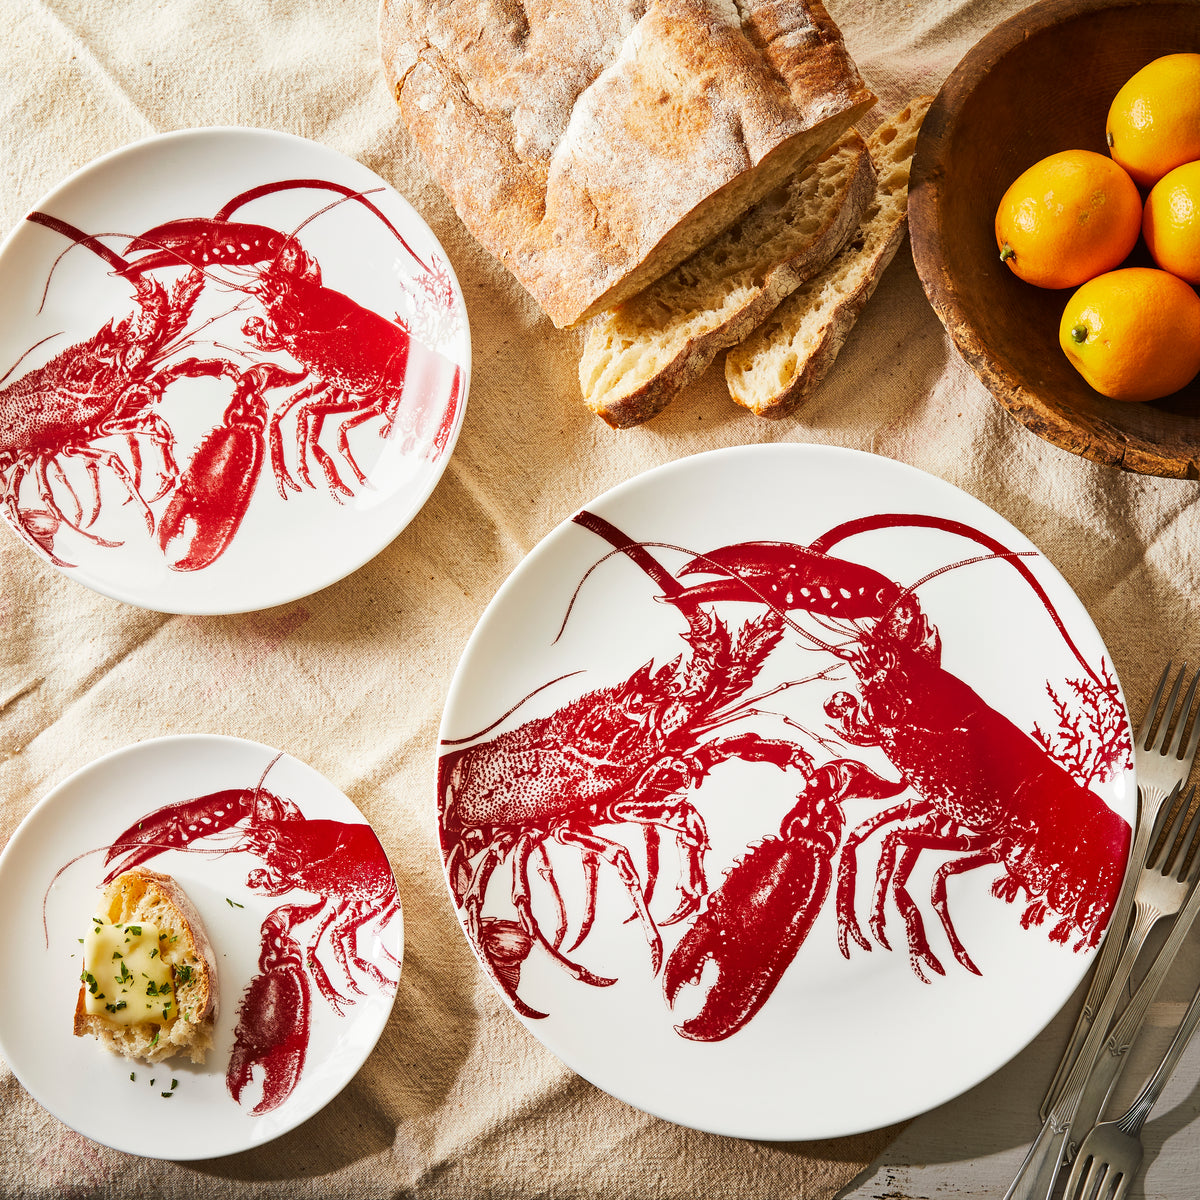 Three premium Caskata Lobster Coupe Salad Plates with red lobster prints sit on a table alongside a loaf of bread, a bowl of oranges, and a small plate with buttered bread and herbs. This charming seaside style setting captures the essence of coastal dining.